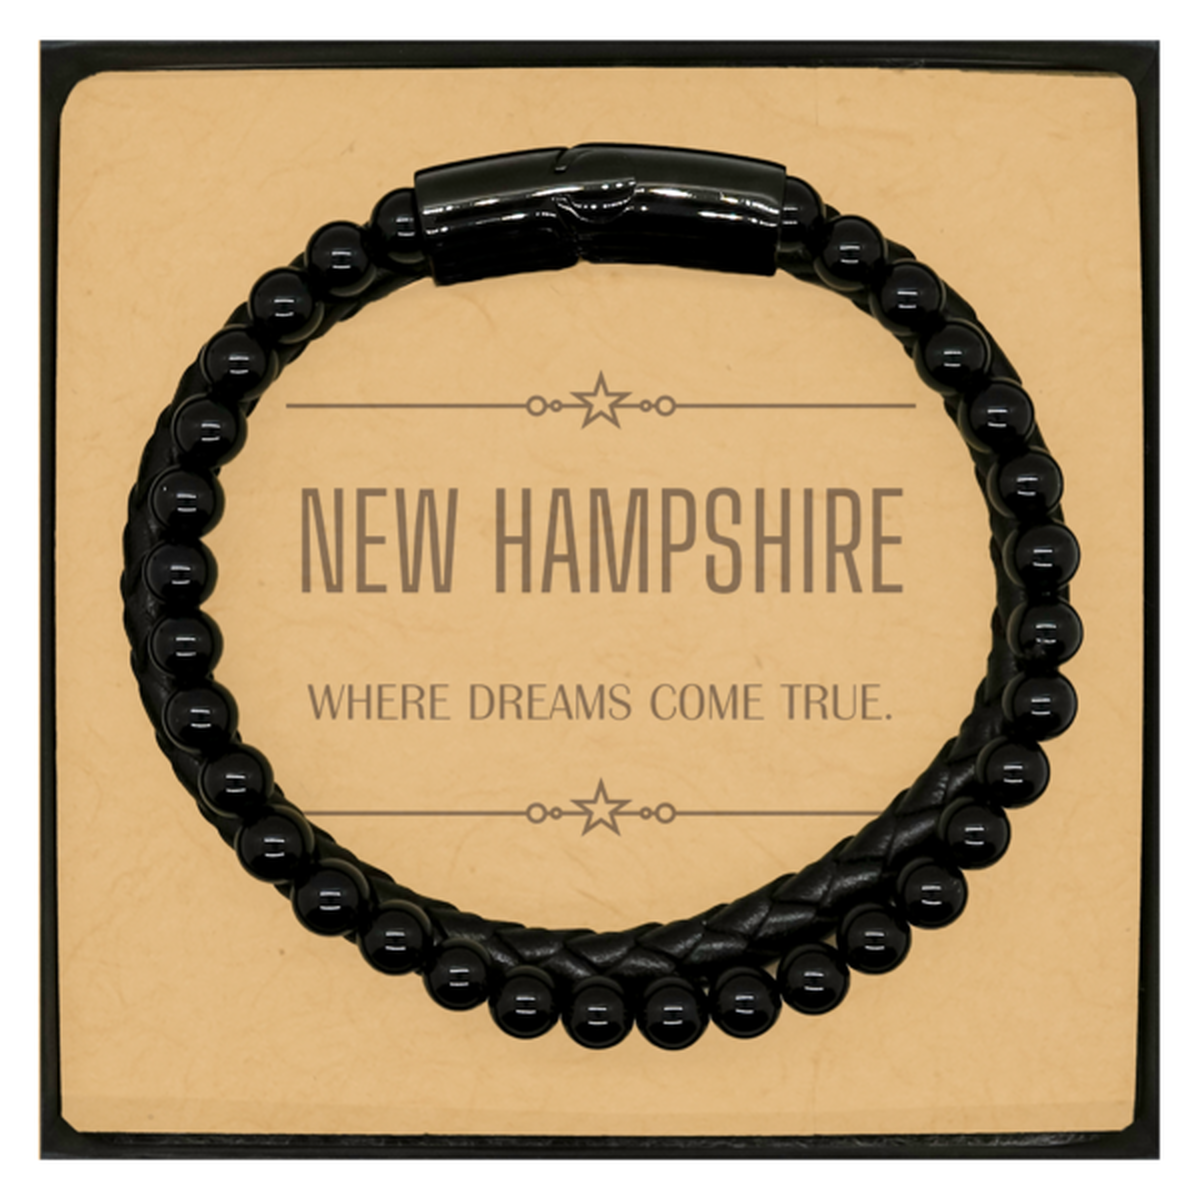 Love New Hampshire State Stone Leather Bracelets, New Hampshire Where dreams come true, Birthday Christmas Inspirational Gifts For New Hampshire Men, Women, Friends